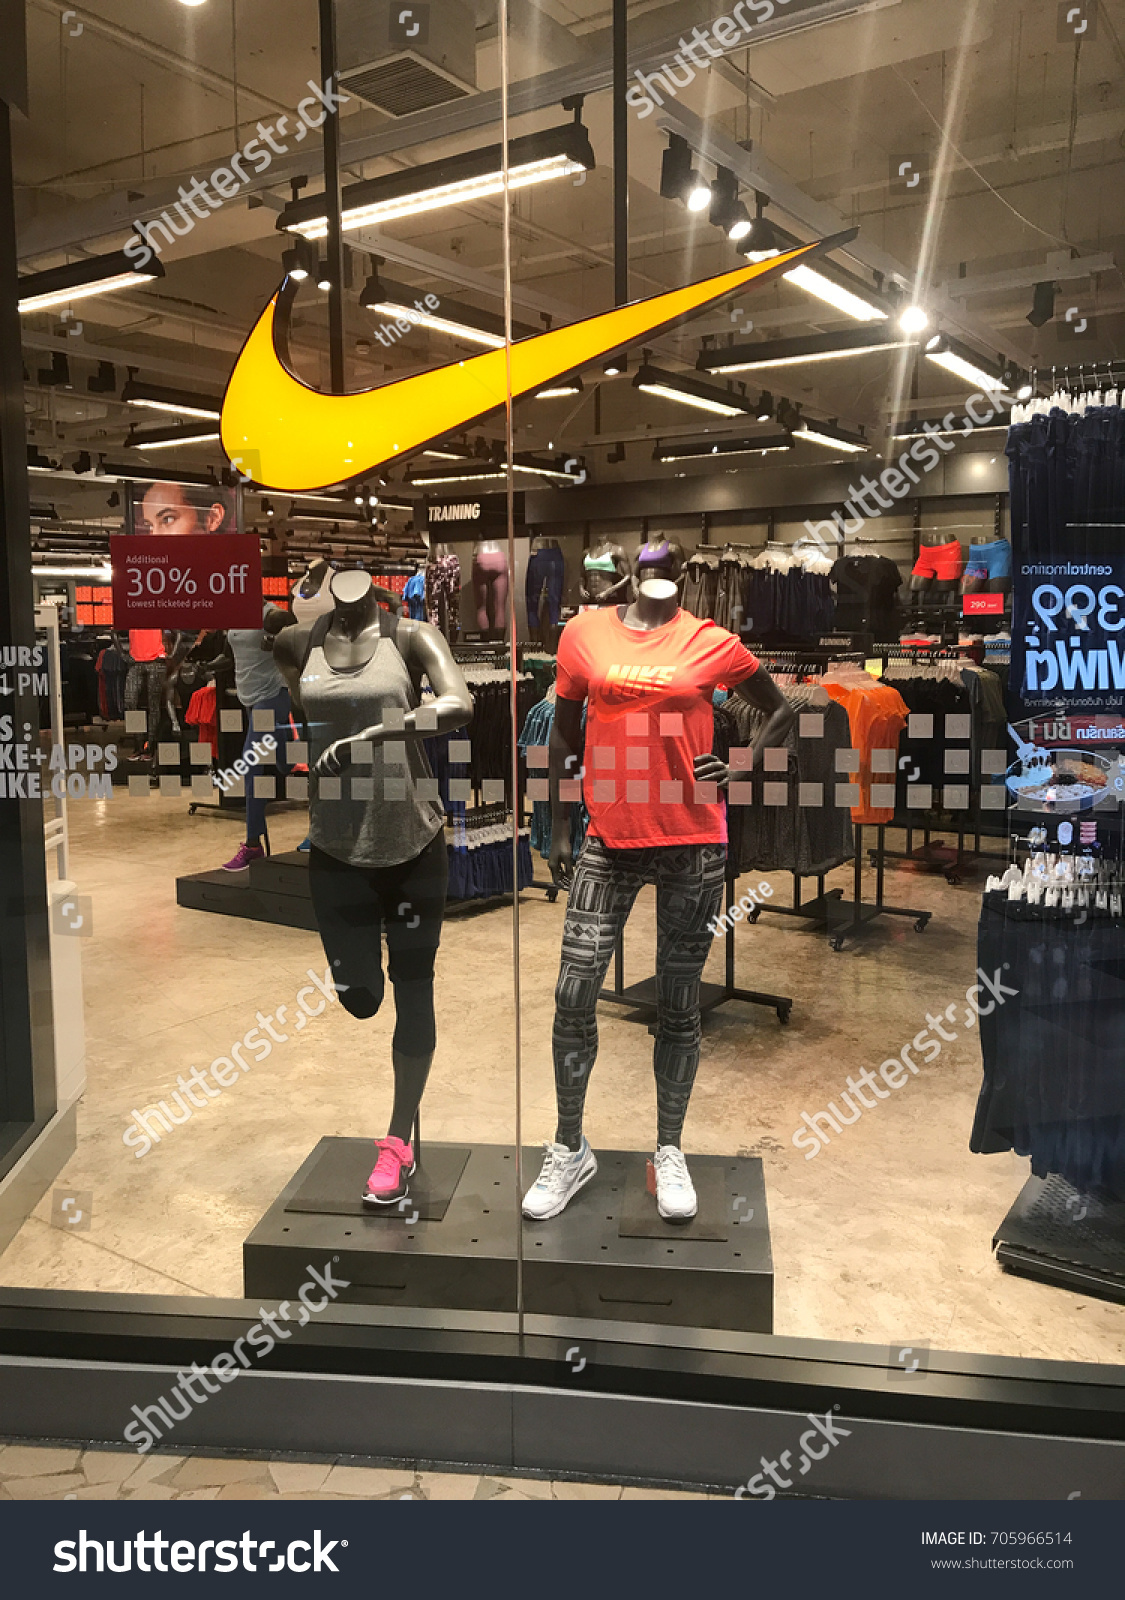 Nike Store Display Window at Central 